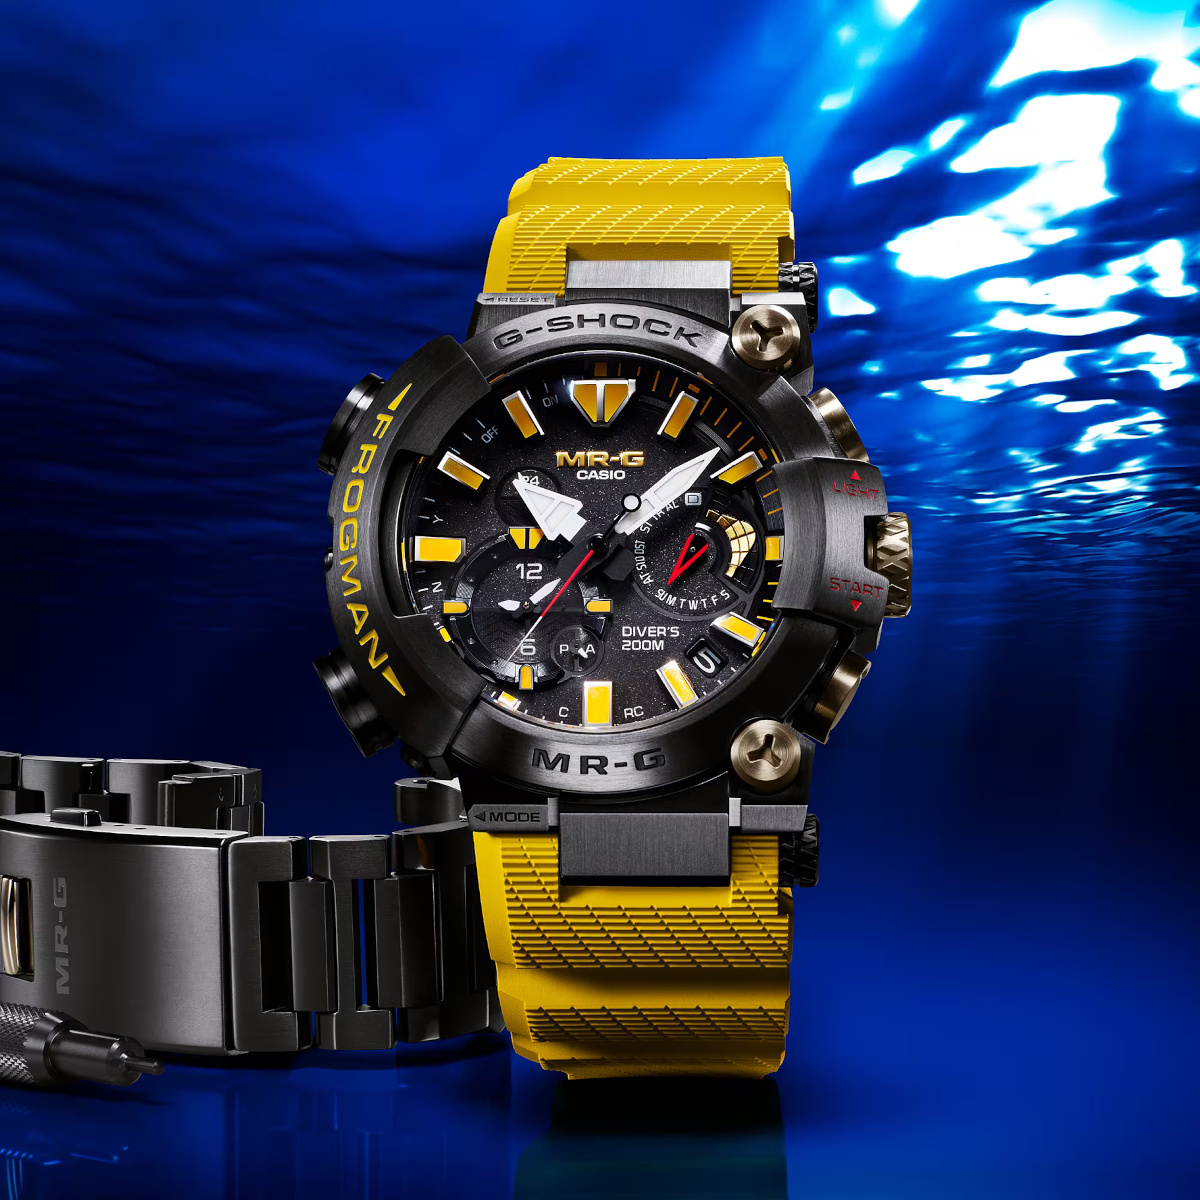 G-Shock Frogman MRG-BF1000E-1A9 includes rubber and titanium bands